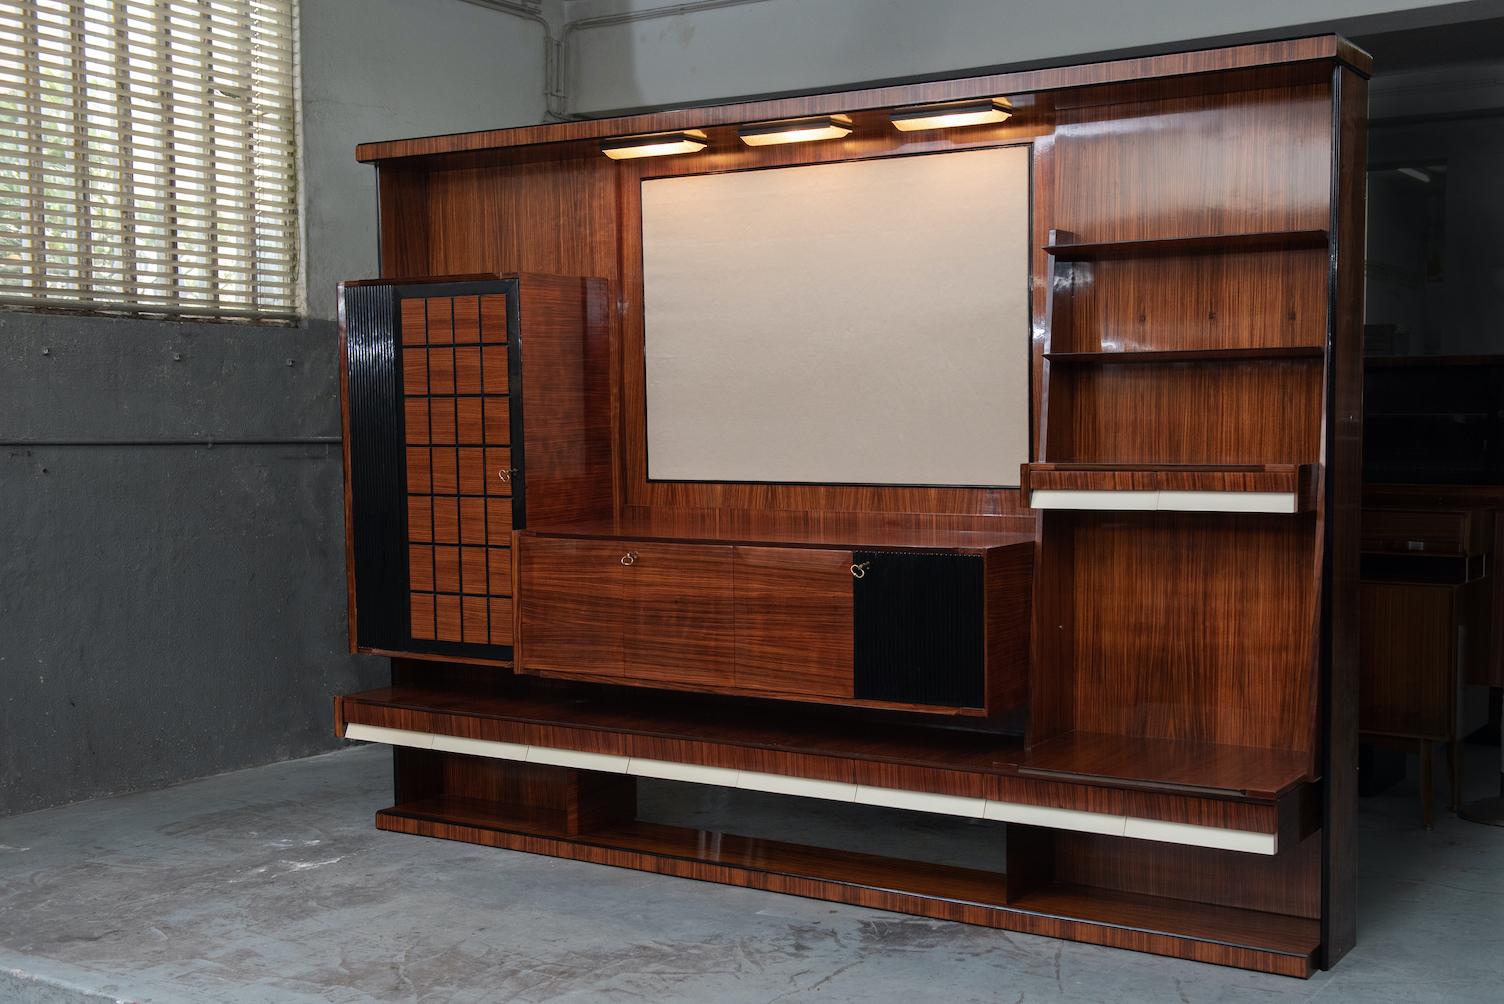 Italian Mid-Century Modern rosewood large living room bookcase with storage, white lacquered details on the drawers and a fabric upholstered panel to put the TV or a painting, is has also three lamps over the upholstered panel.